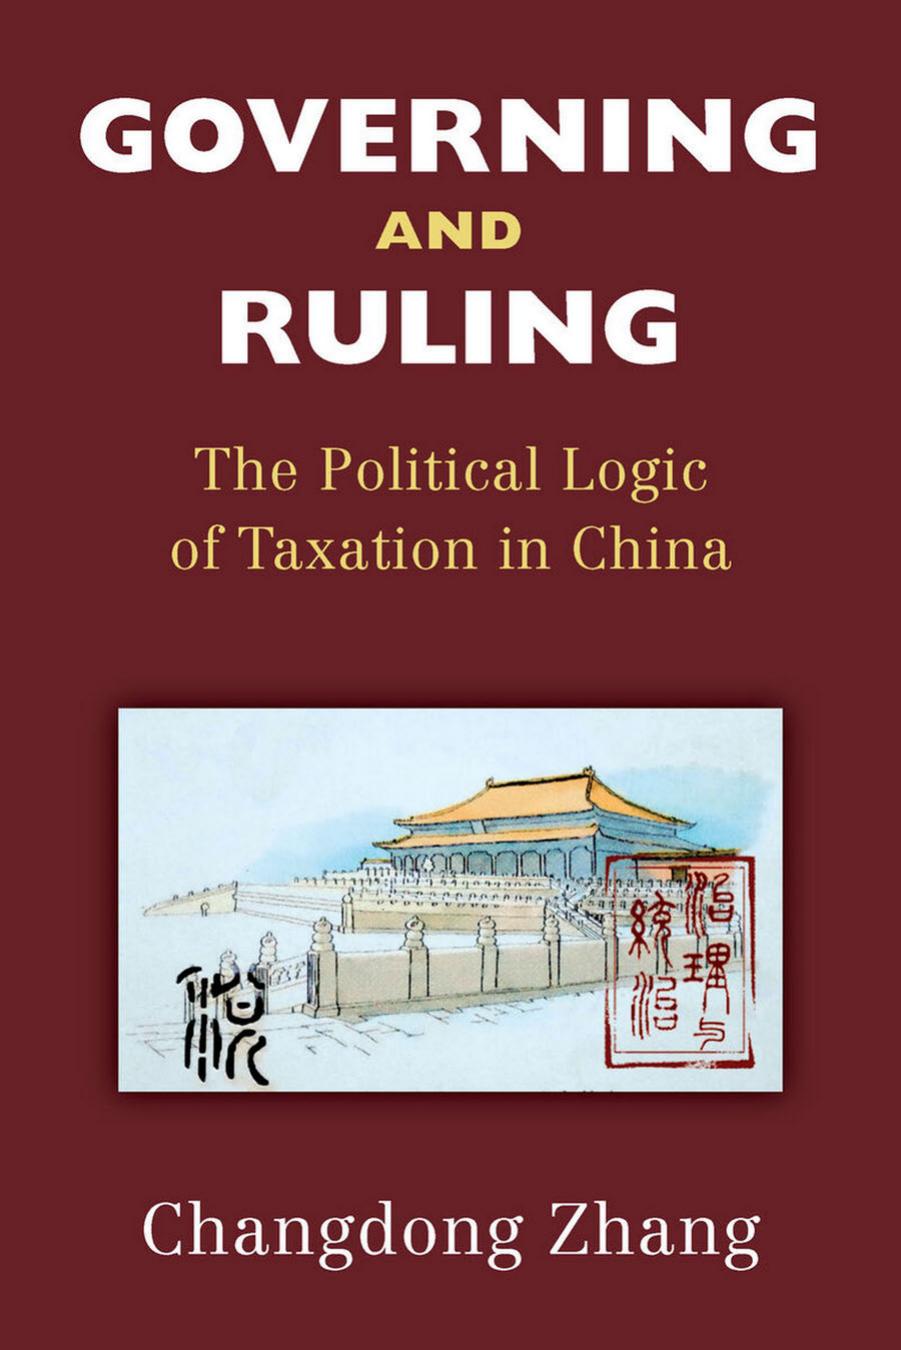 Governing and Ruling: The Political Logic of Taxation in China by Changdong Zhang